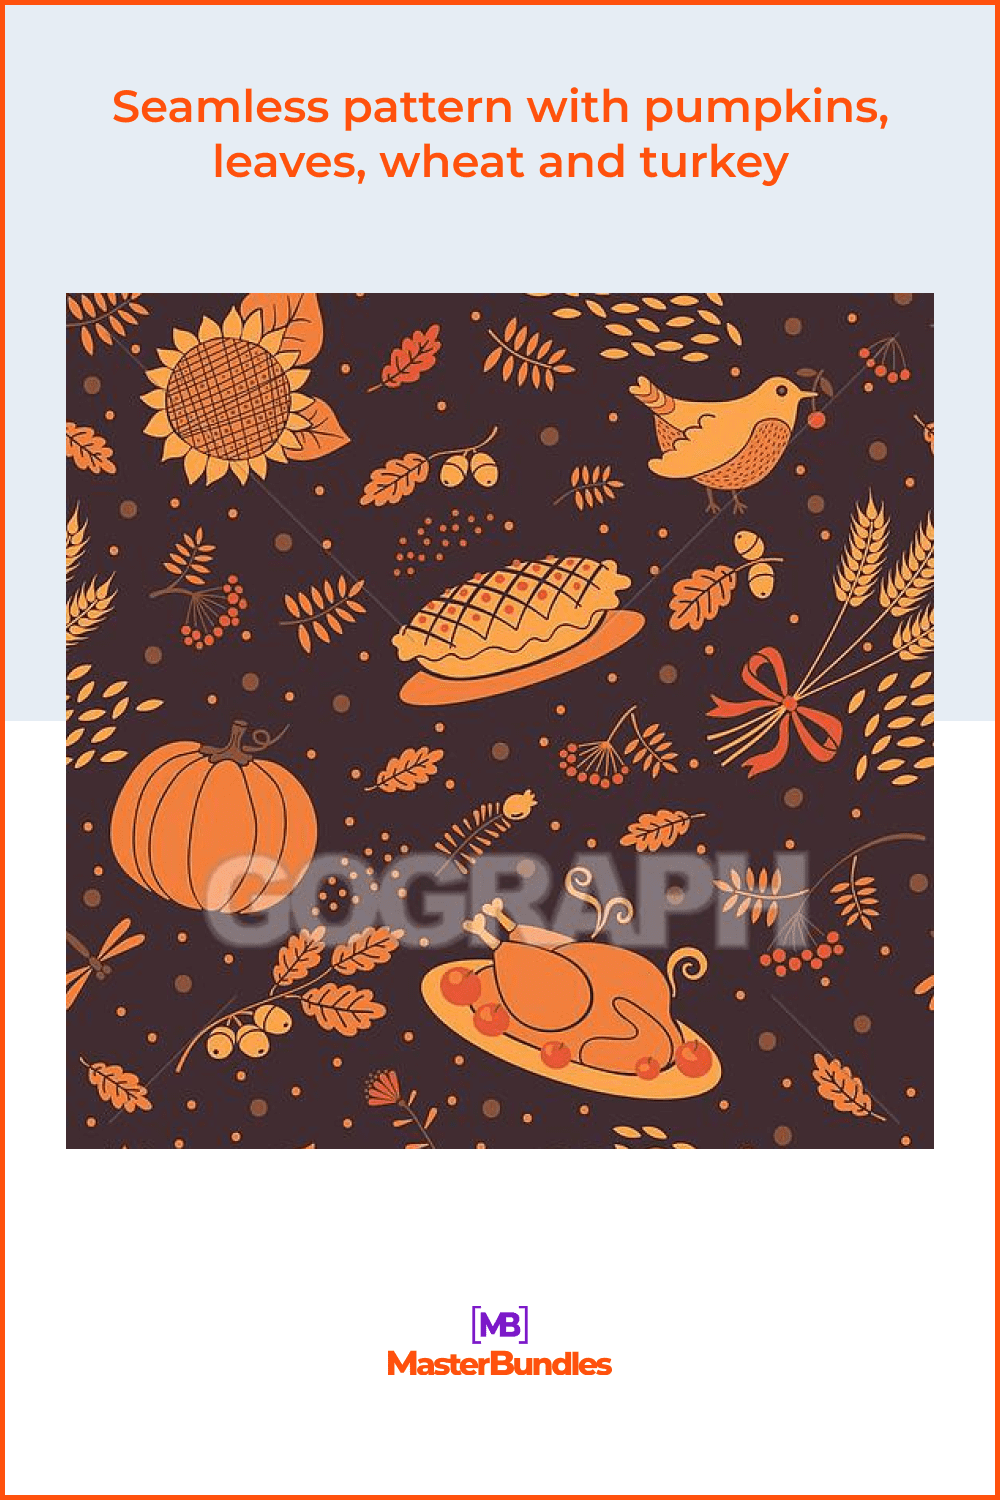 Seamless pattern with pumpkins, leaves, wheat and turkey.